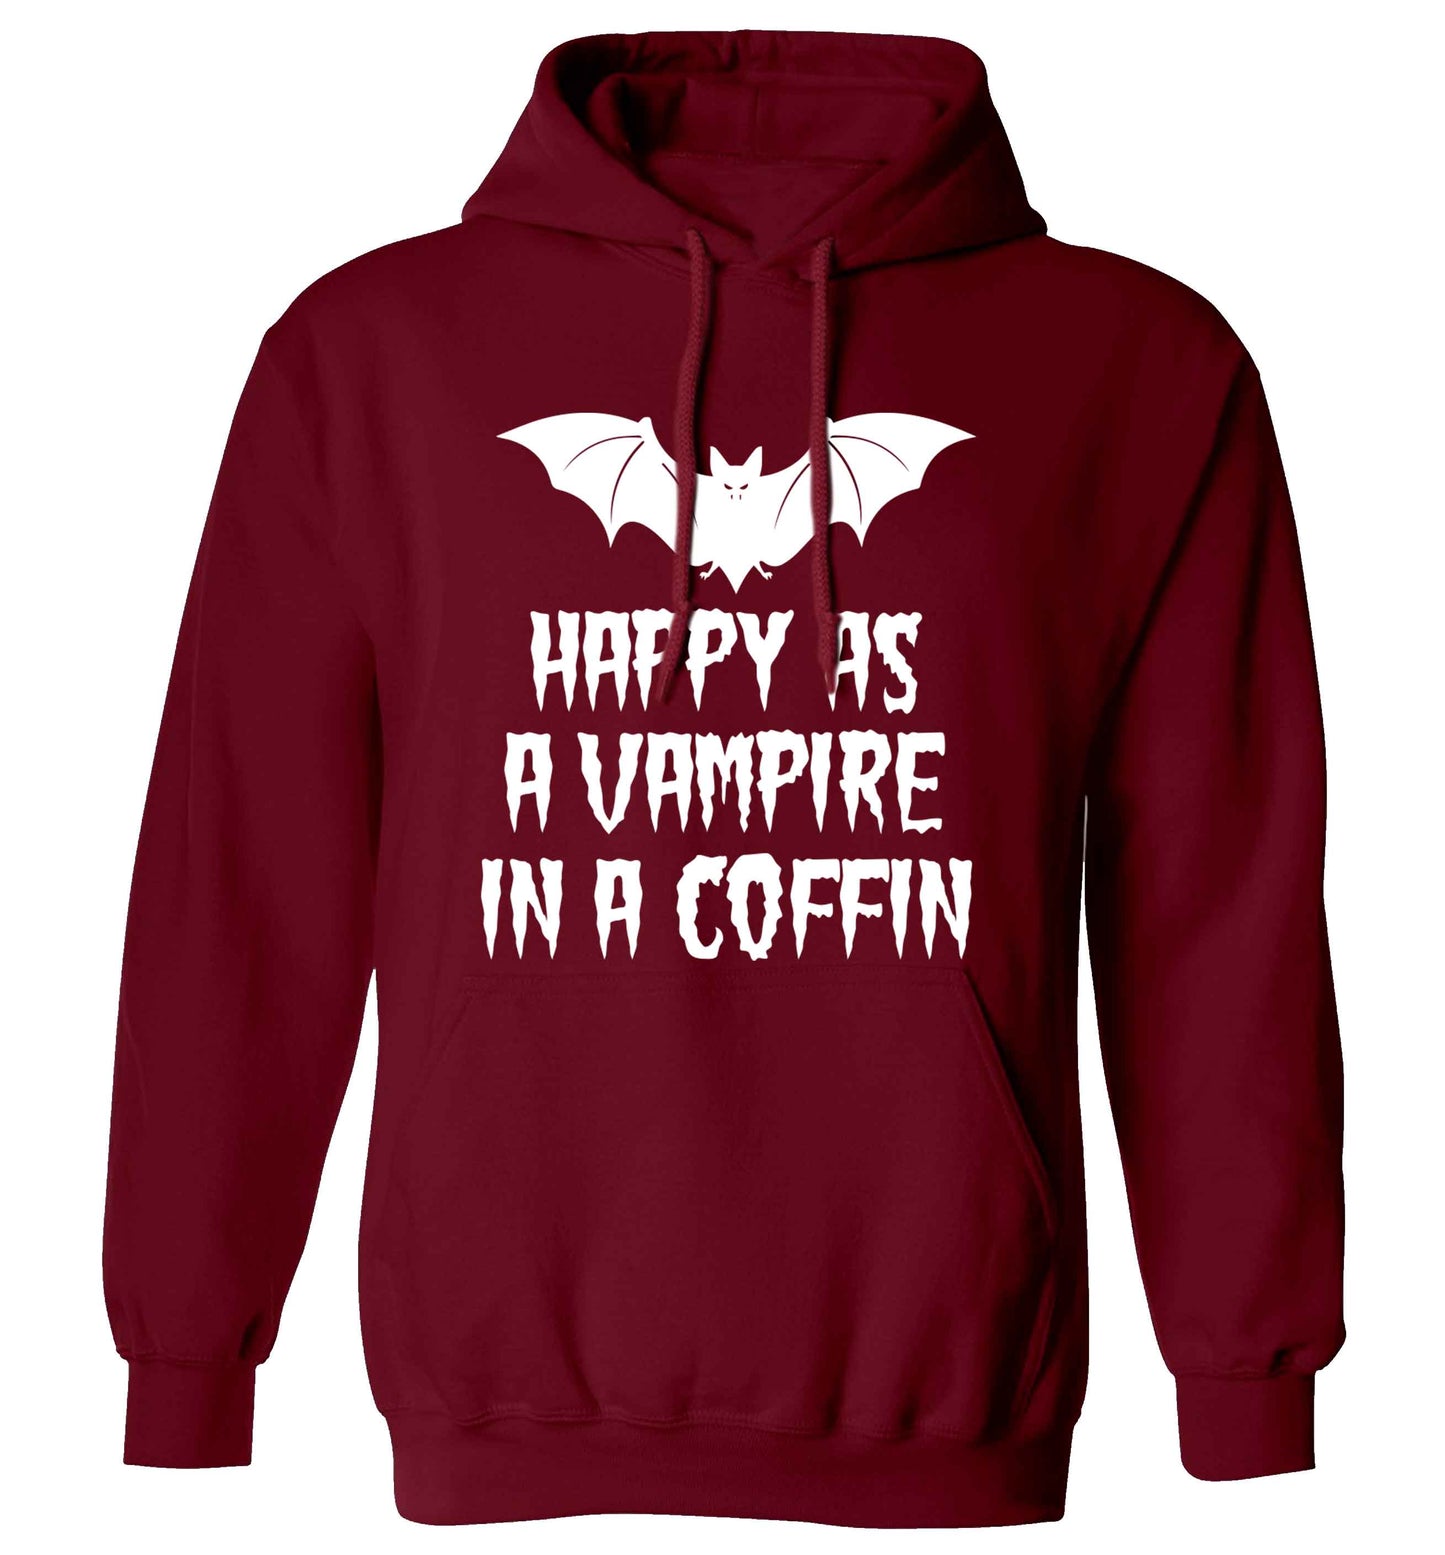 Happy as a vampire in a coffin adults unisex maroon hoodie 2XL